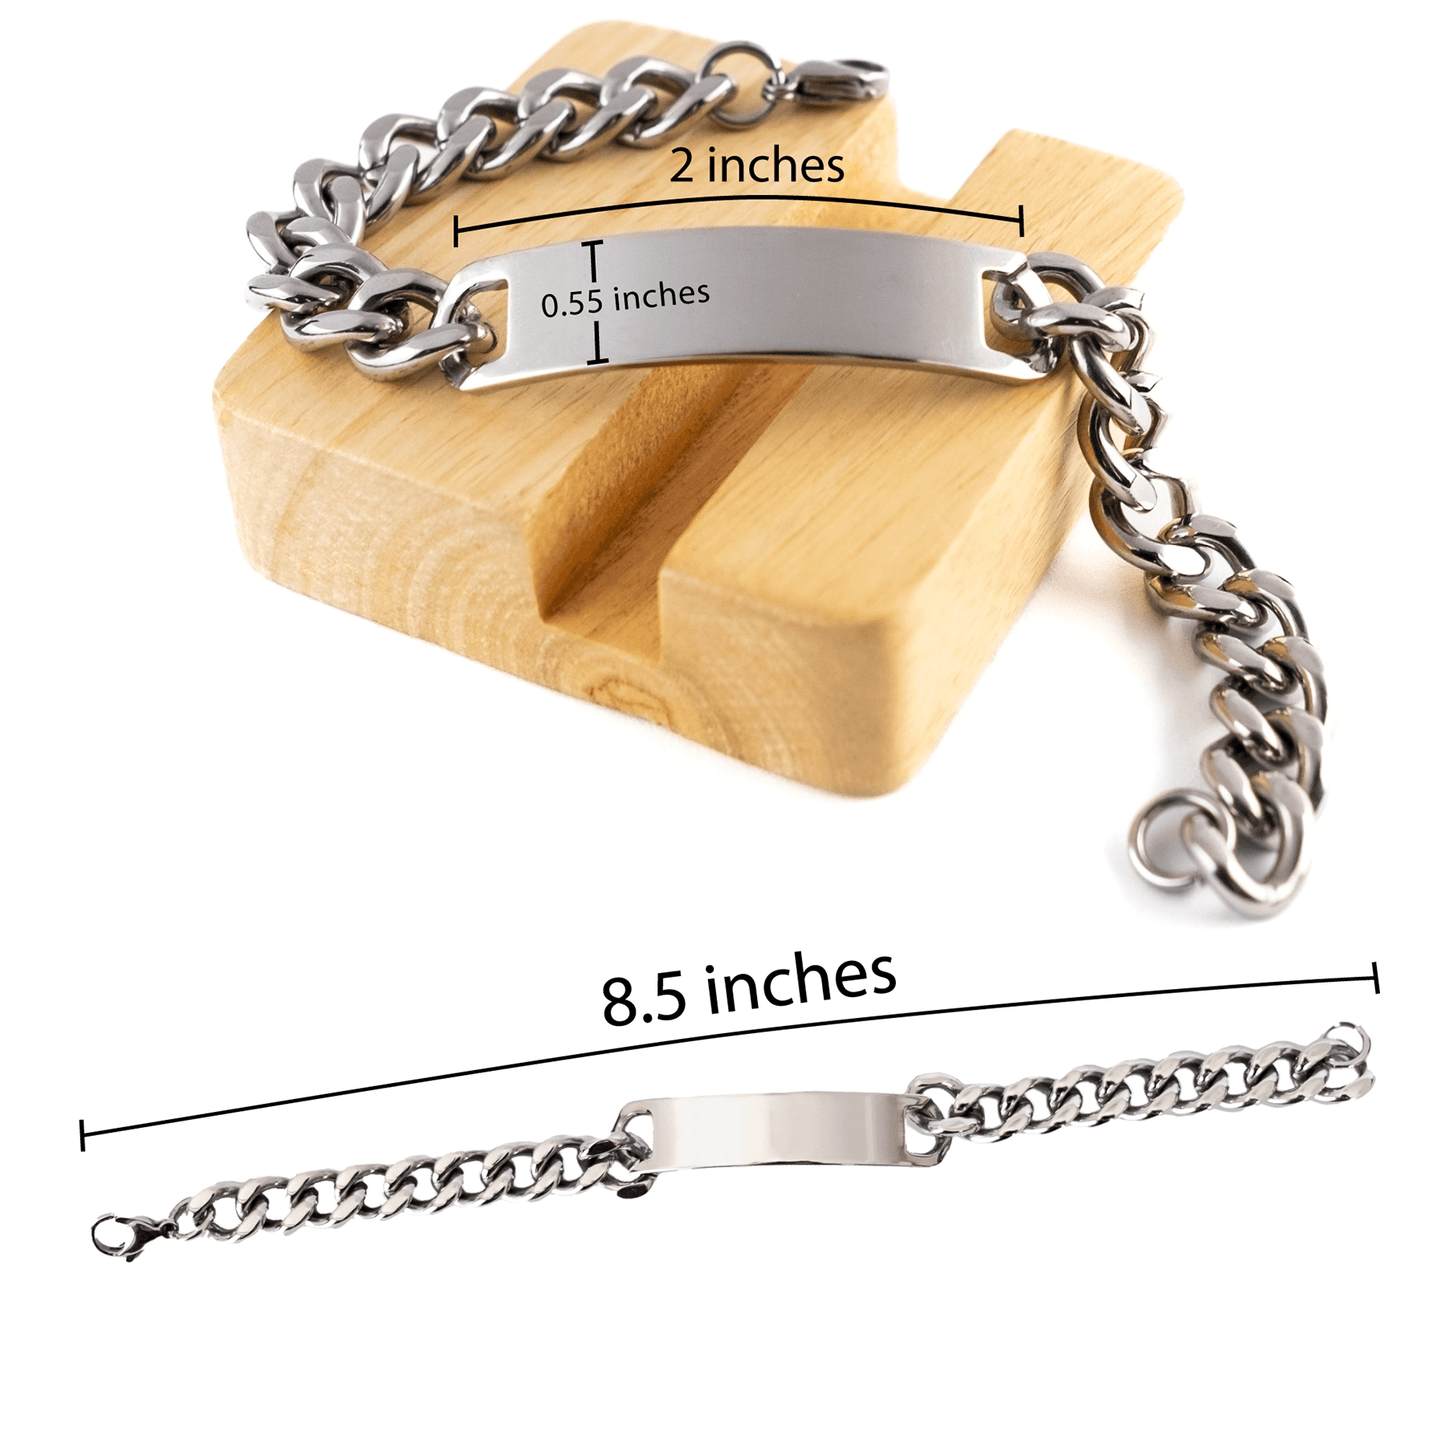 Bonus Son Long Distance Relationship Gifts, No matter the miles that separate us, Cute Love Cuban Chain Stainless Steel Bracelet For Bonus Son, Birthday Christmas Unique Gifts For Bonus Son - Mallard Moon Gift Shop